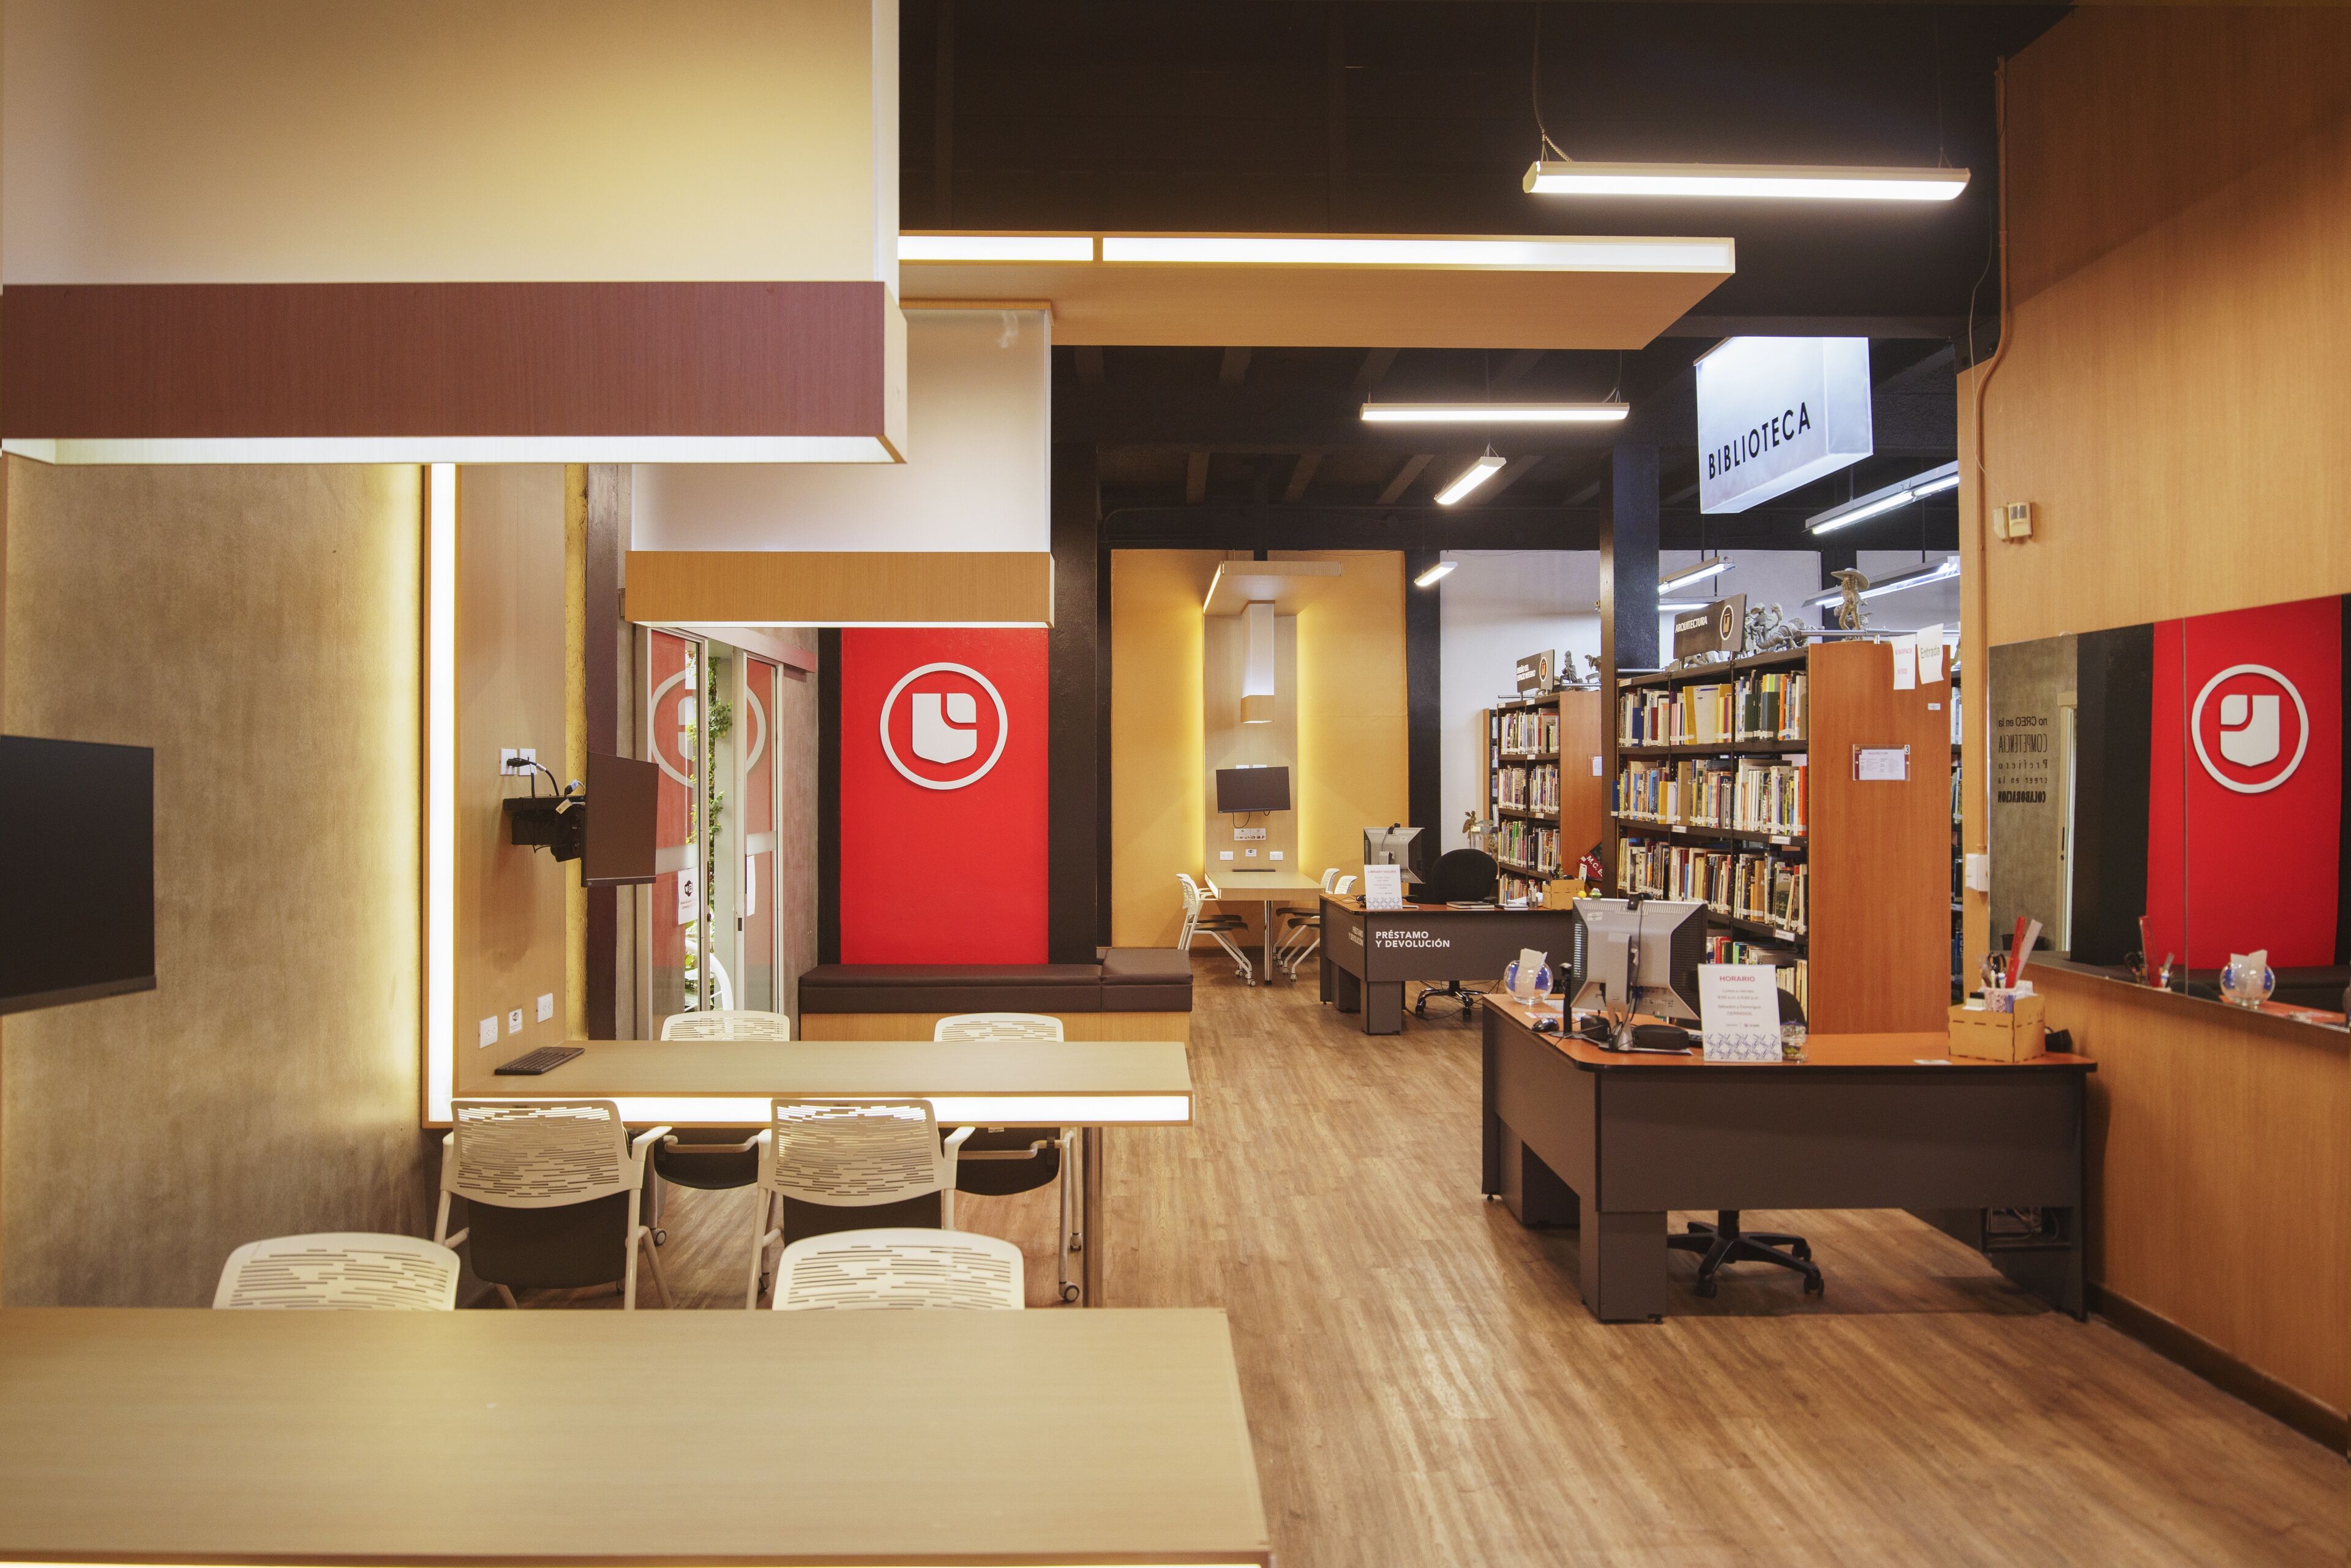 A contemporary library setting with organized bookshelves, study tables, and warm lighting, featuring a prominent red logo.